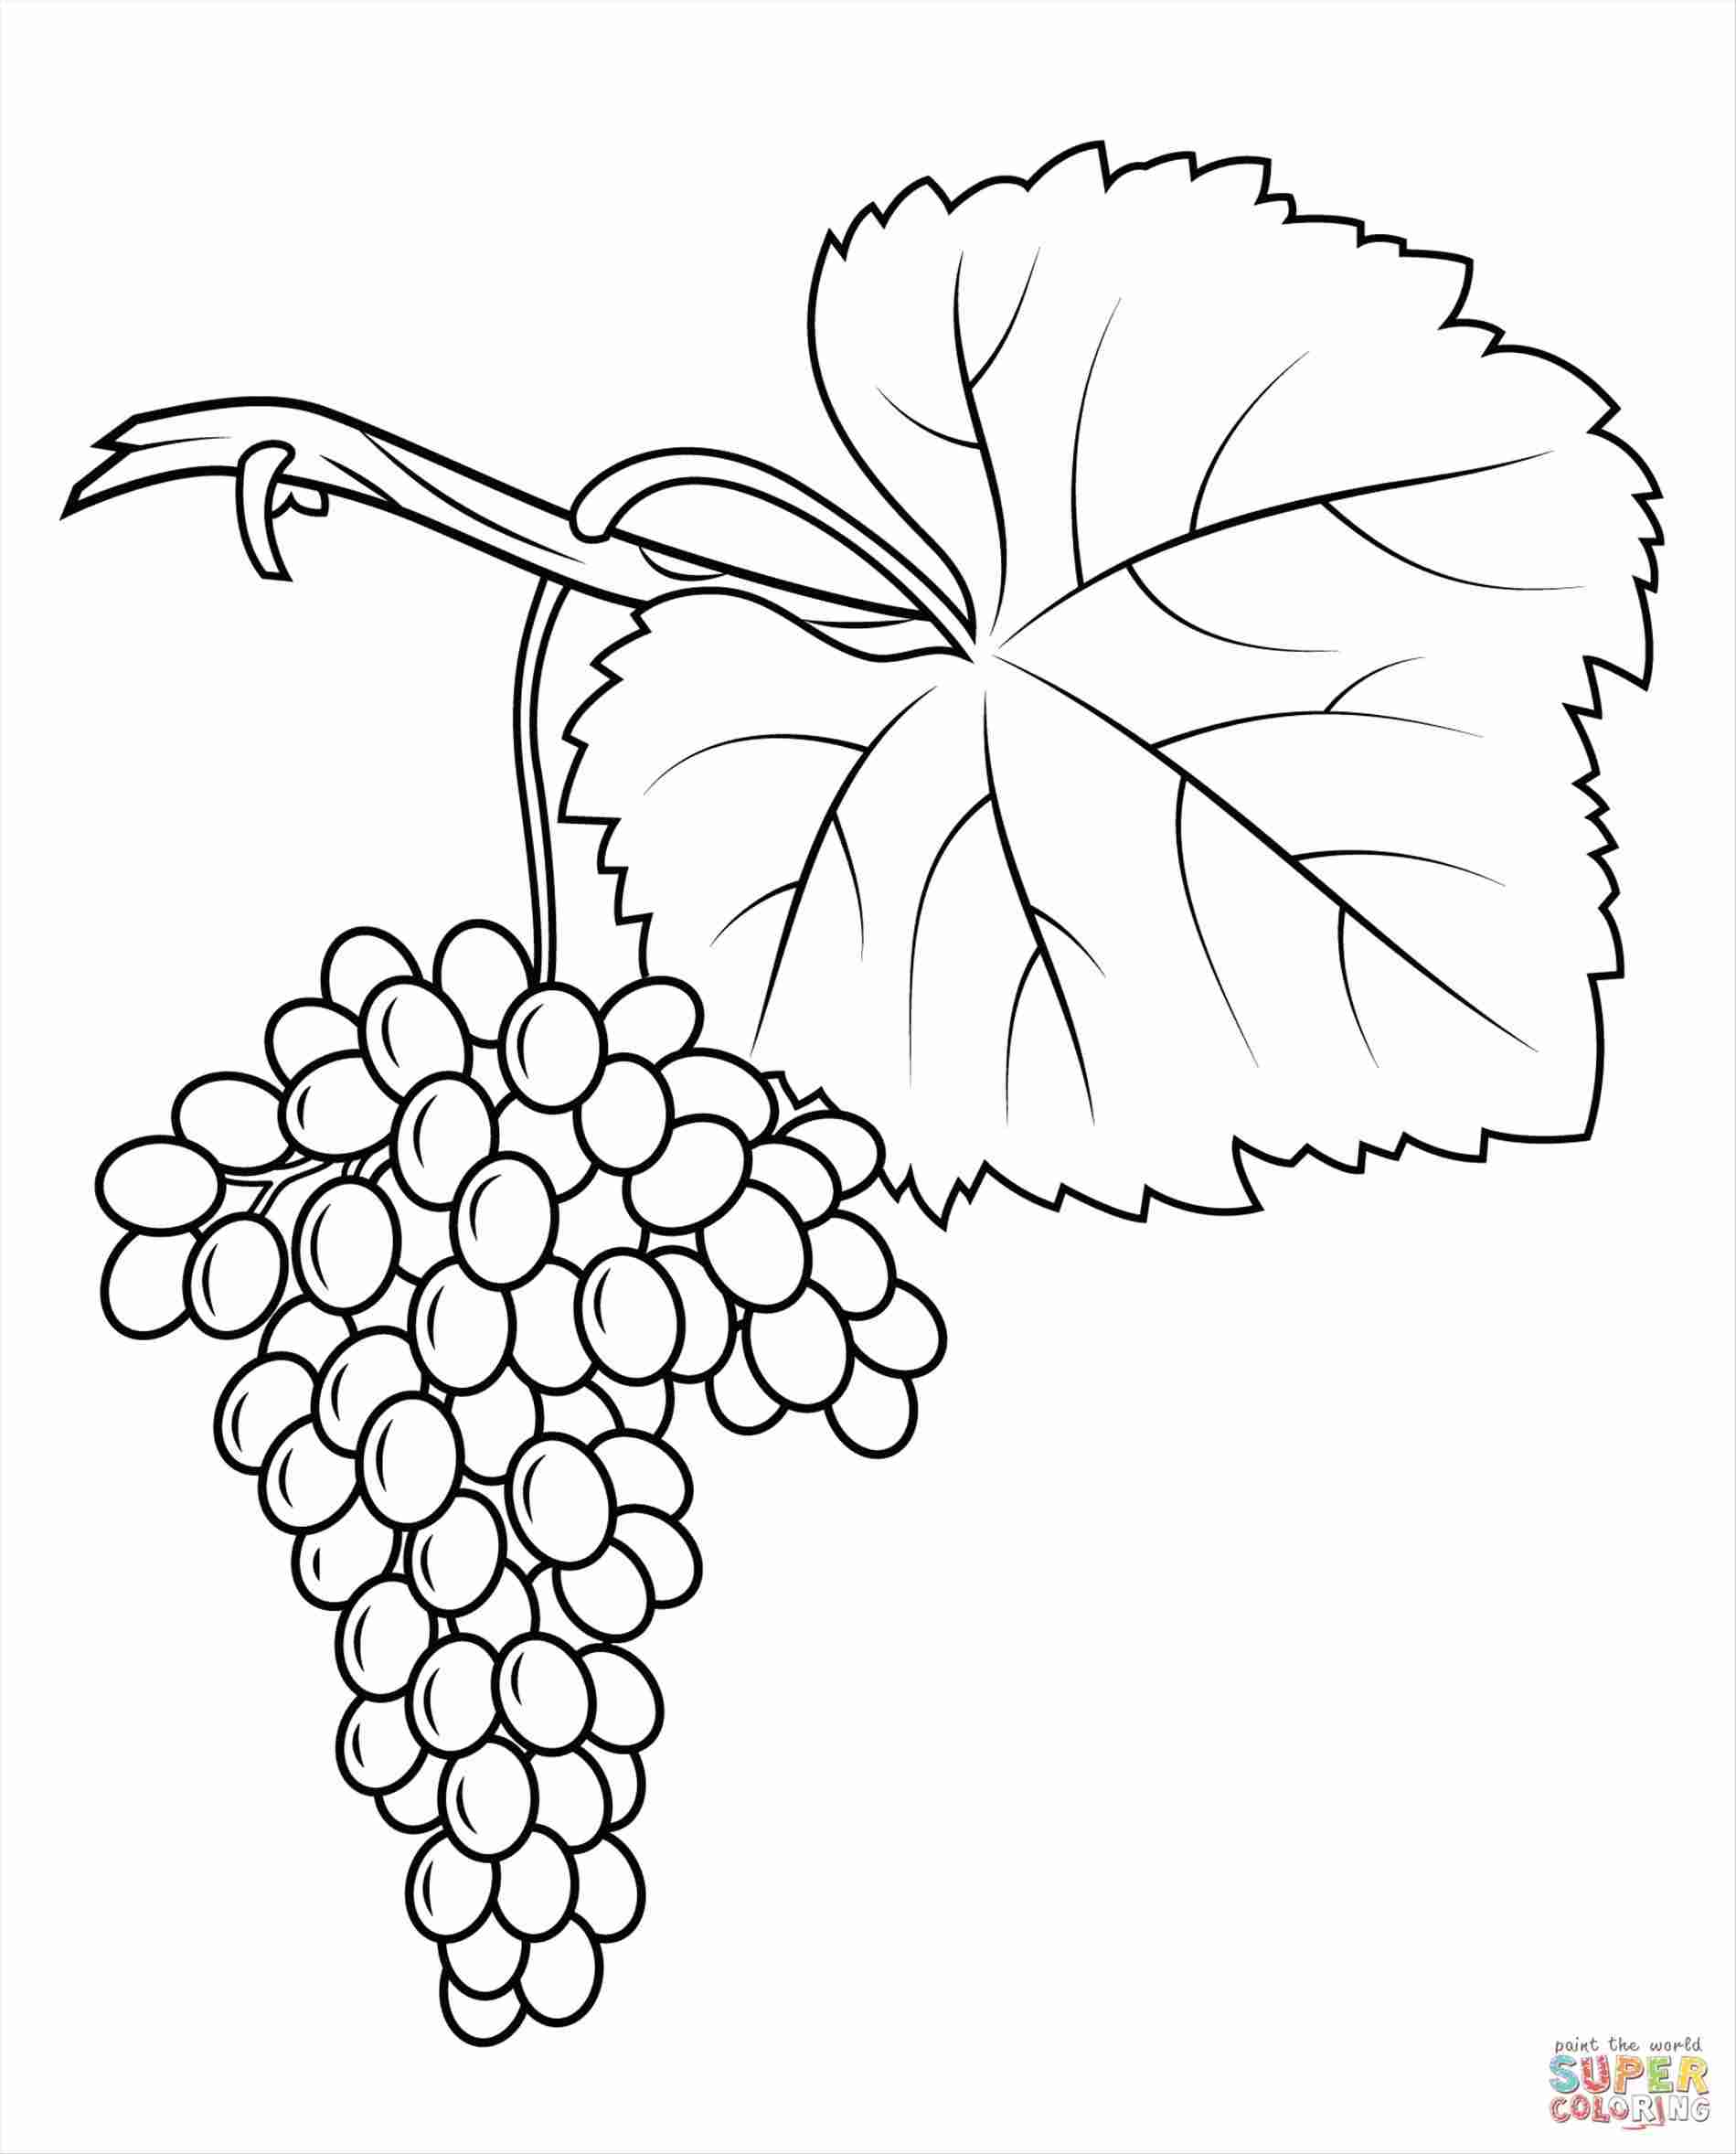 grapes-leaves-drawing-at-paintingvalley-explore-collection-of